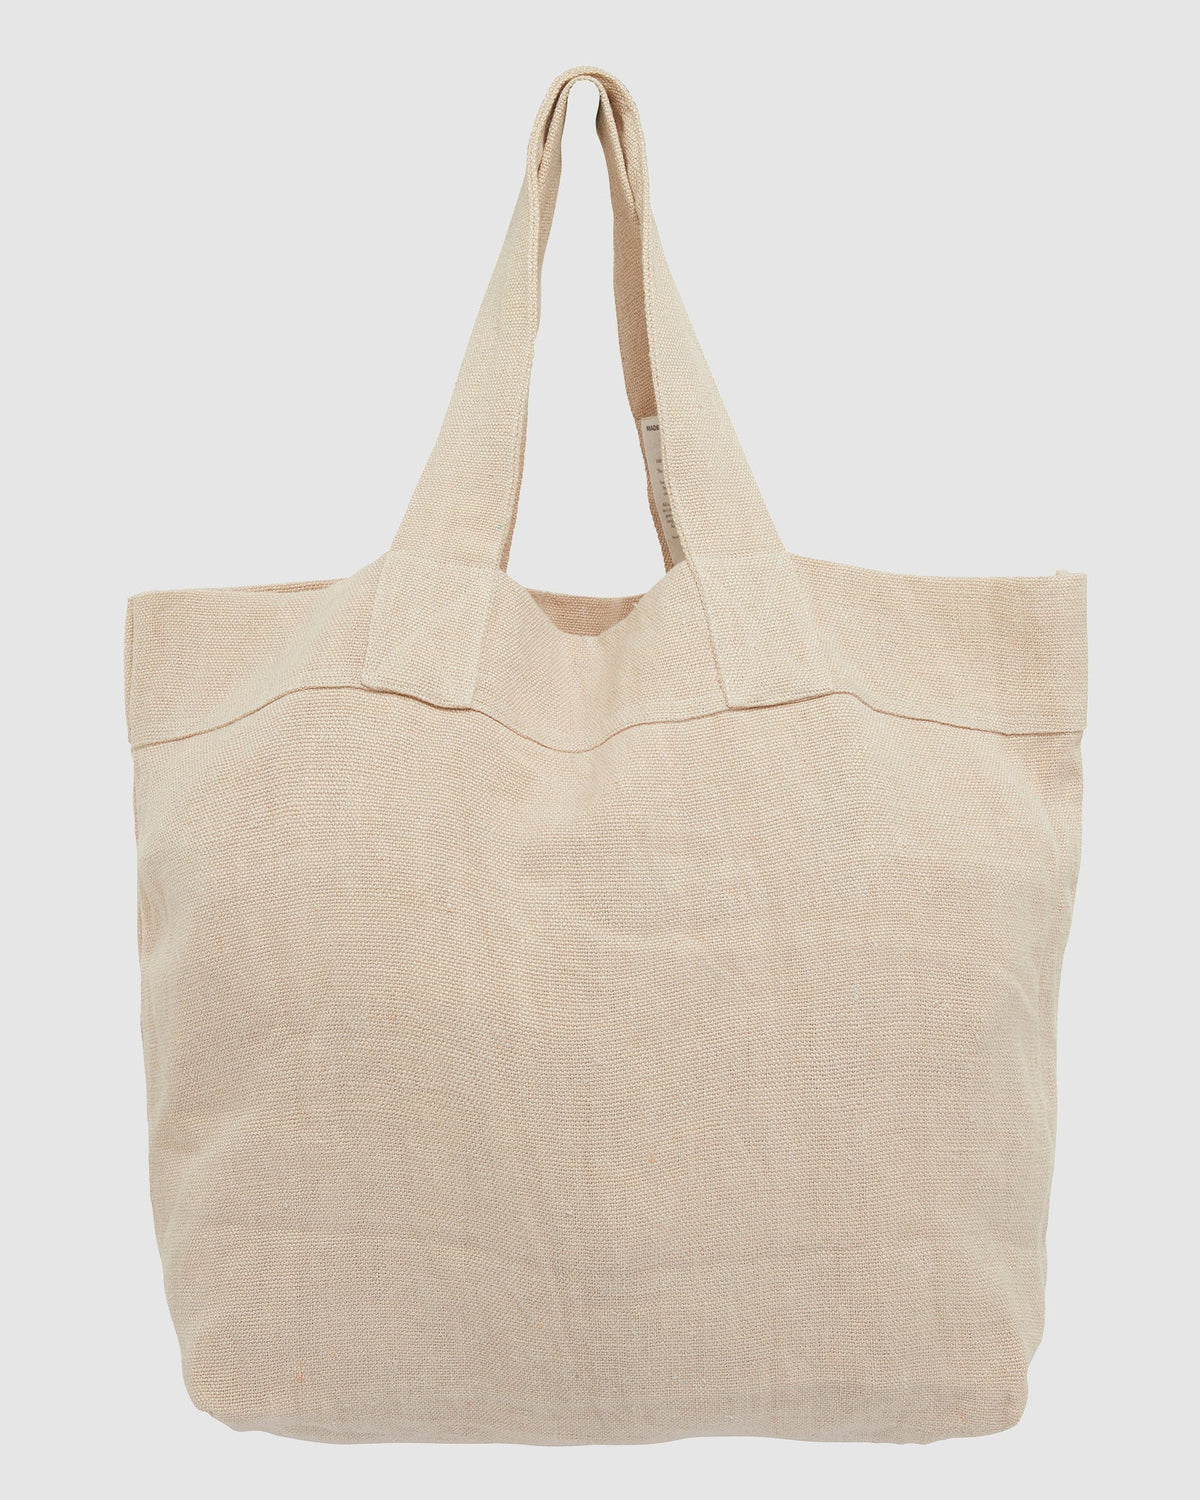 The Linen Tote Bag Cobblestone, Hand Loomed Linen Accessories, Sustainable & Ethically Made Accessories, Made For Good, Cloth & Co. 